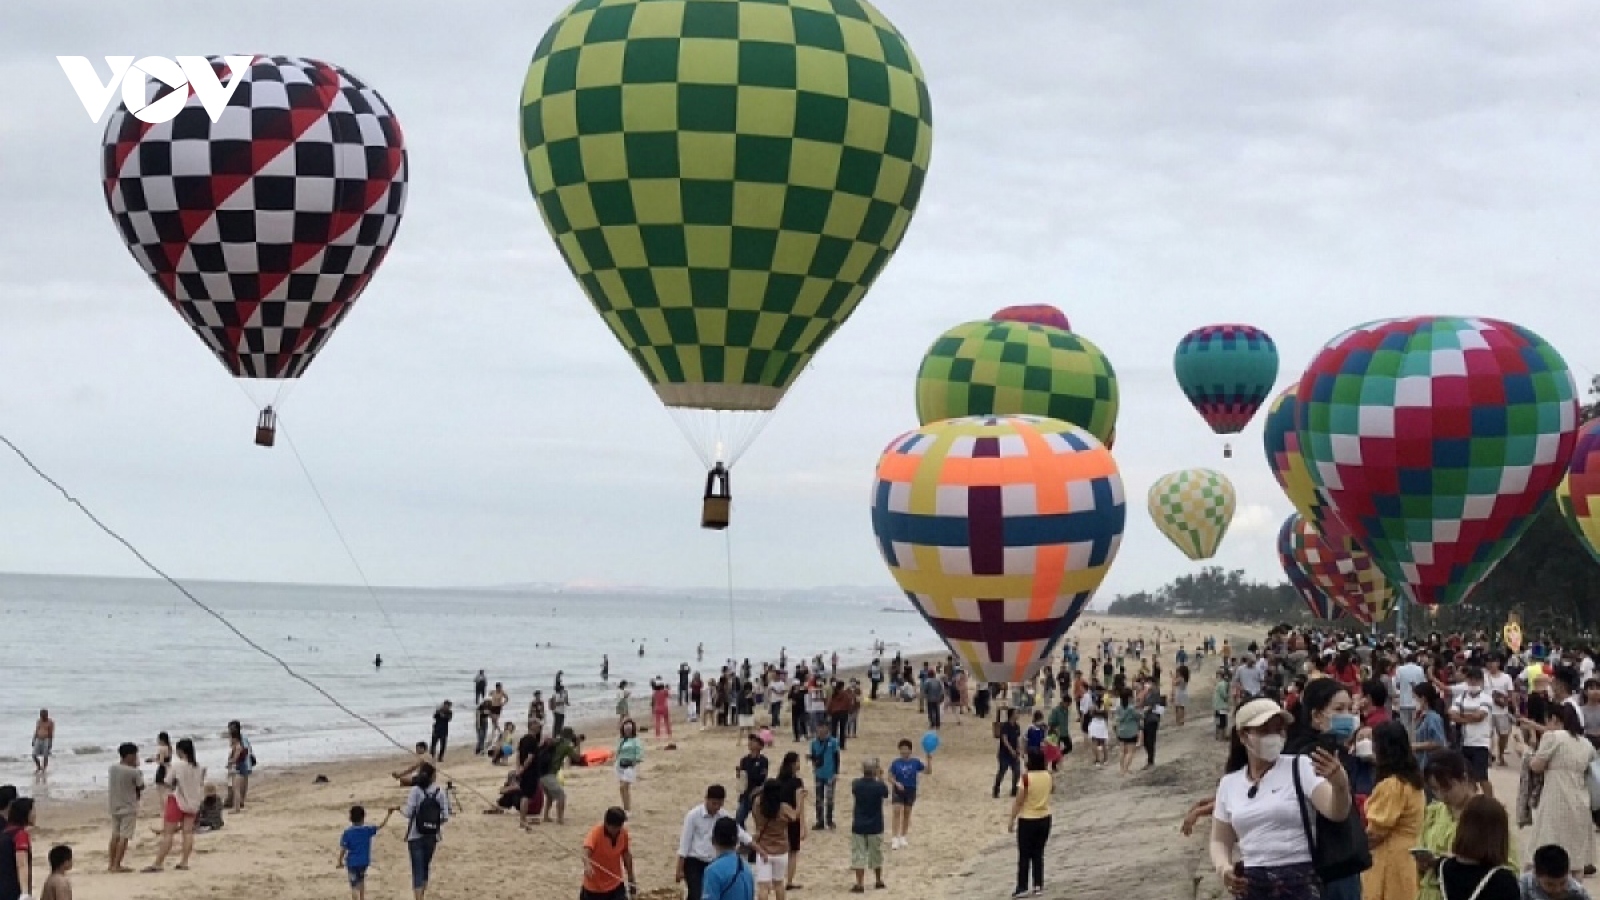 Hot-air balloon festival takes to skies to welcome Tourism Year 2023